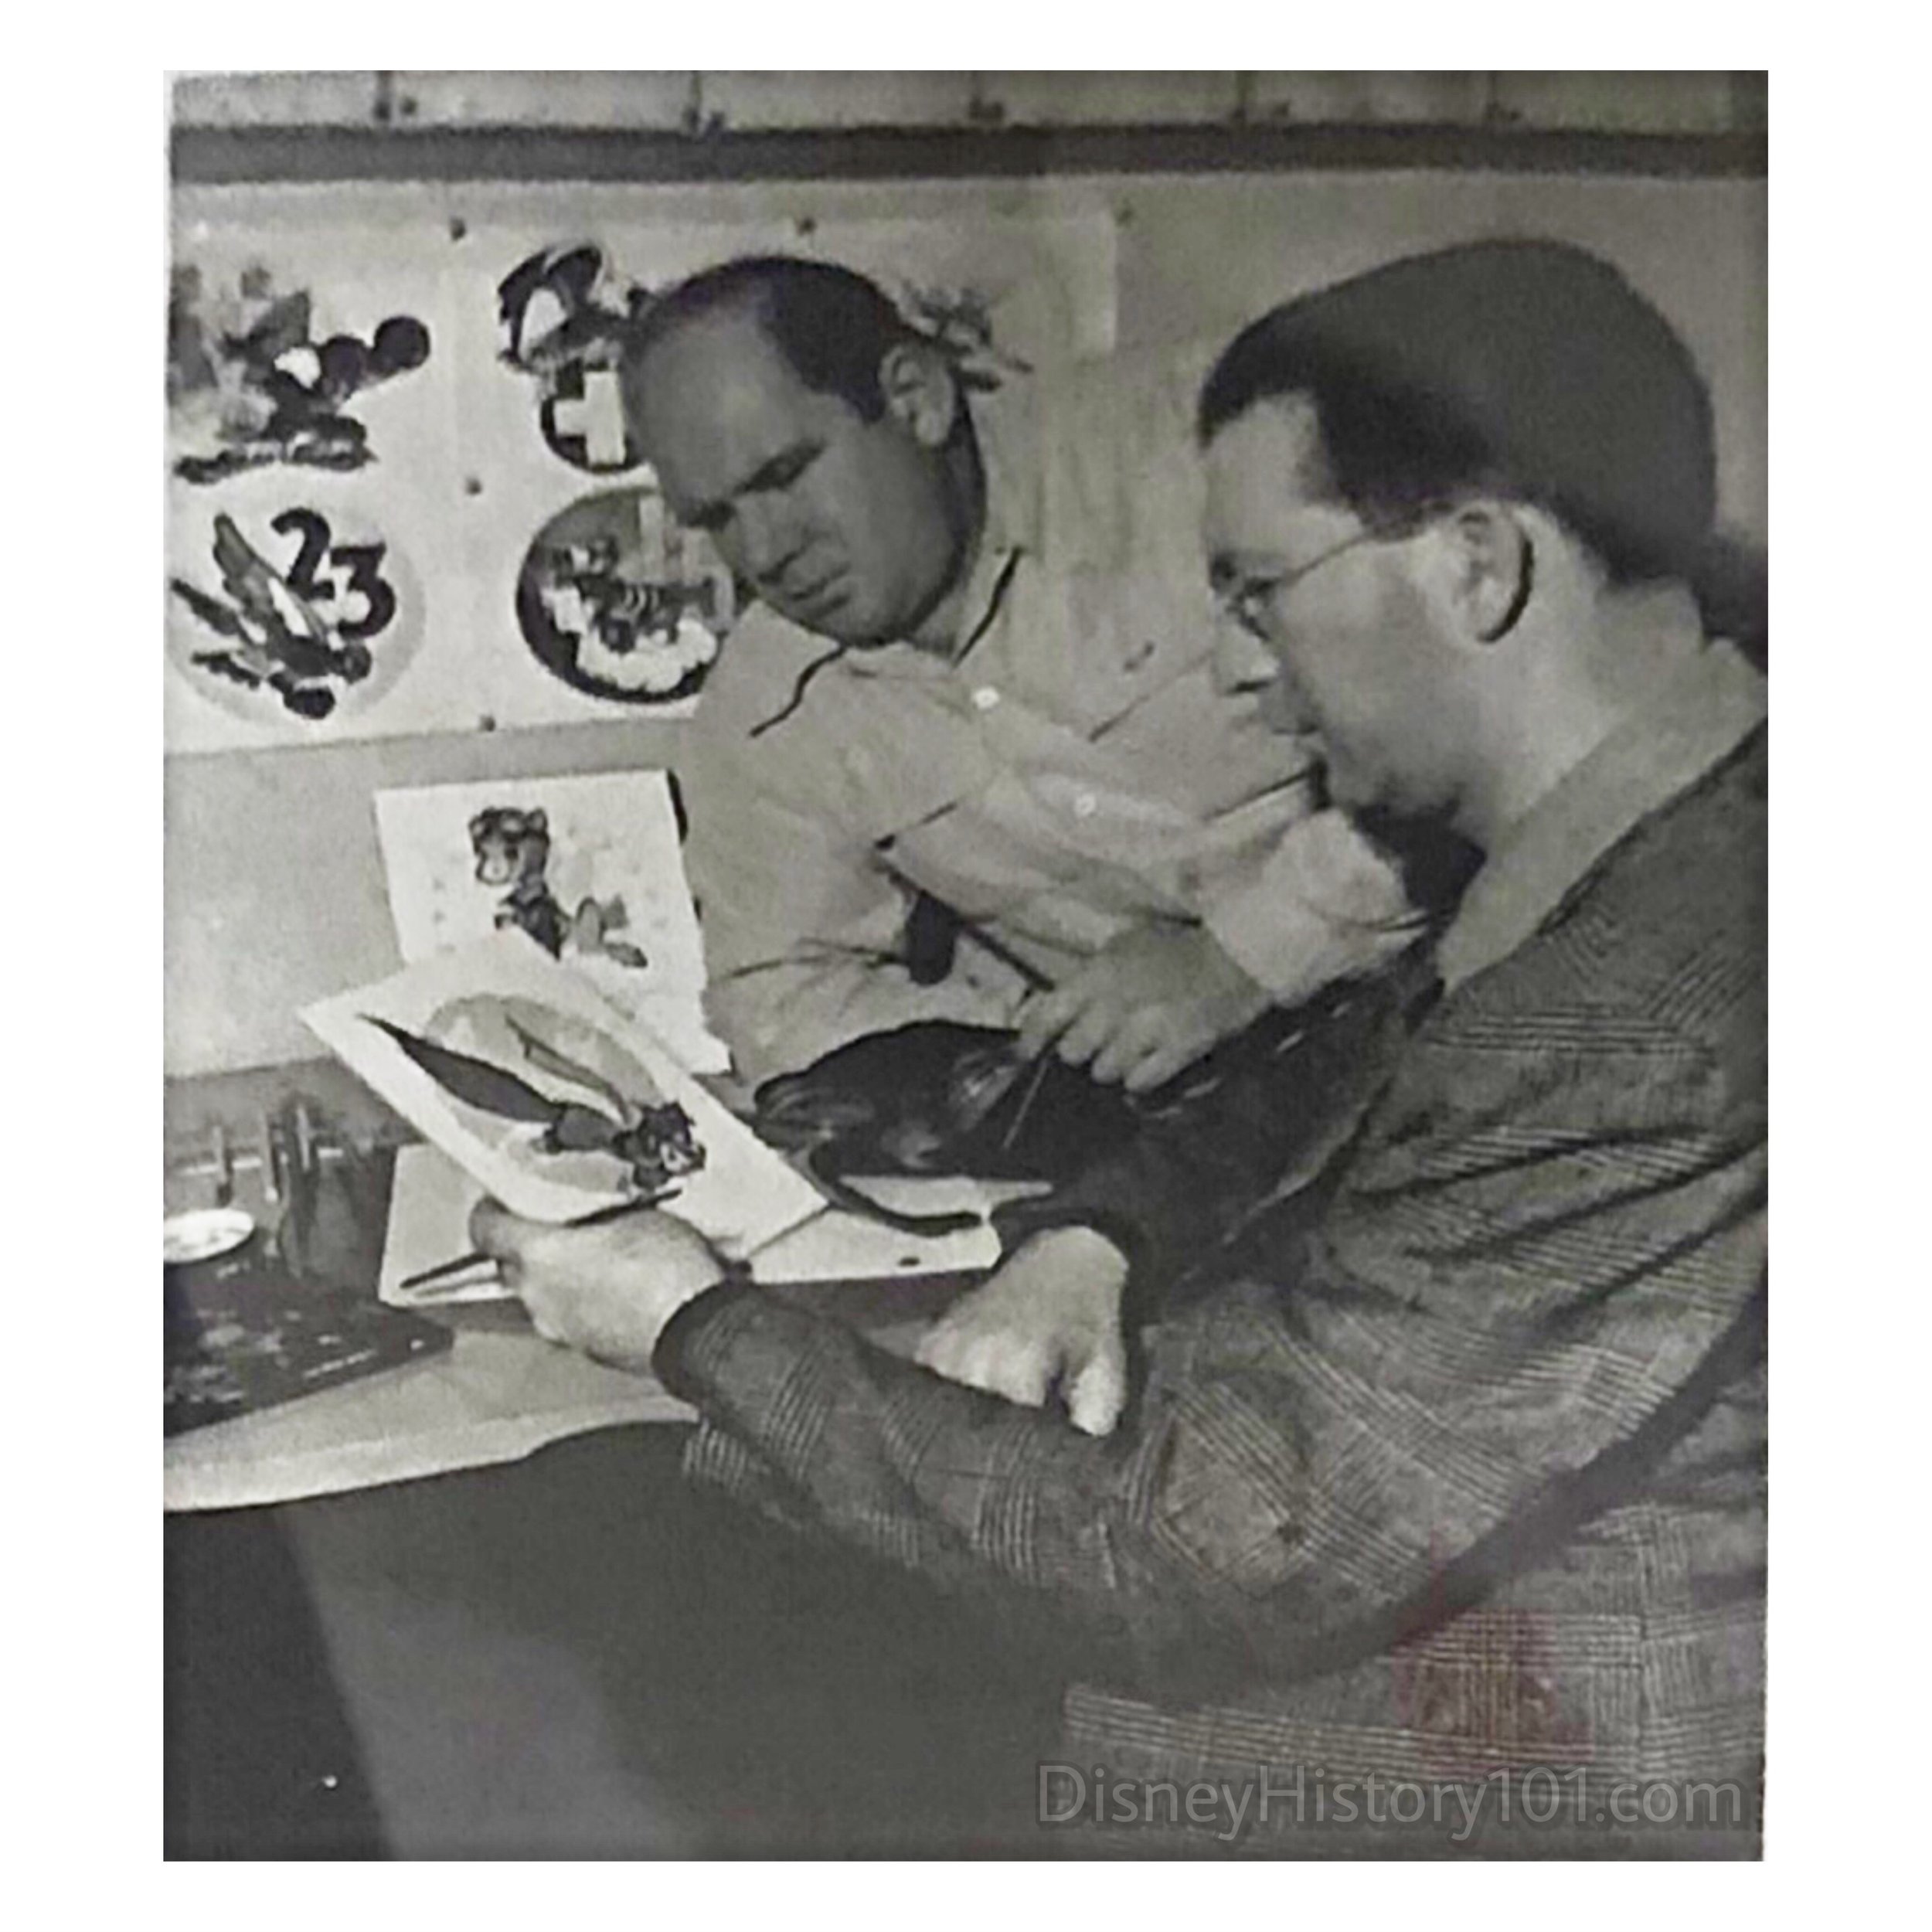 Roy Williams (left) and Hank Porter (right) create insignias for the Walt Disney Studios Insignia Department.